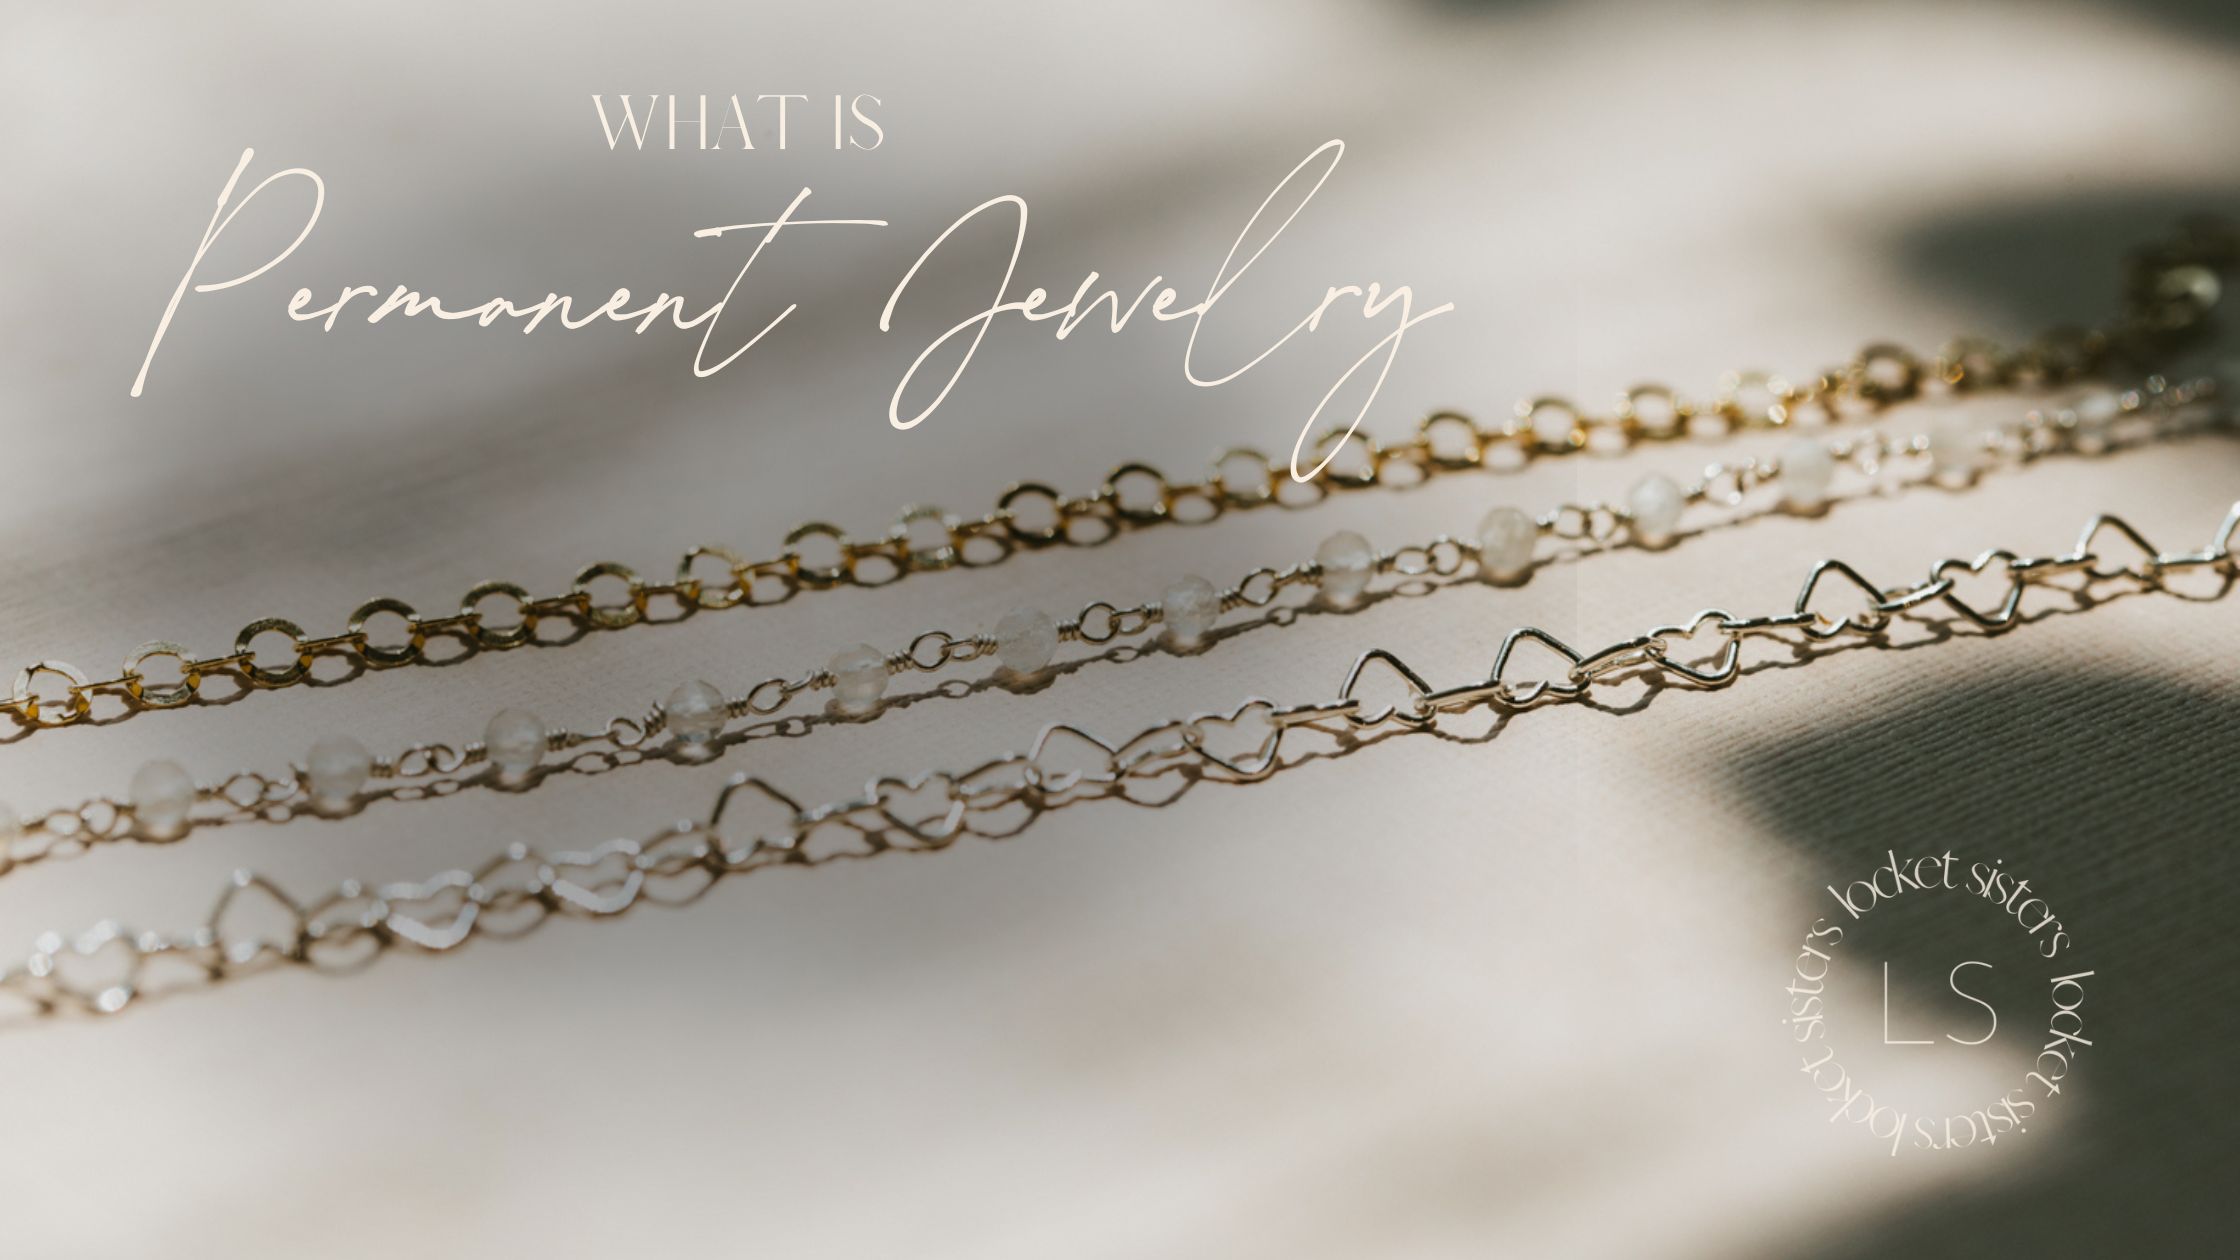 What is Permanent Jewelry? - Locket Sisters